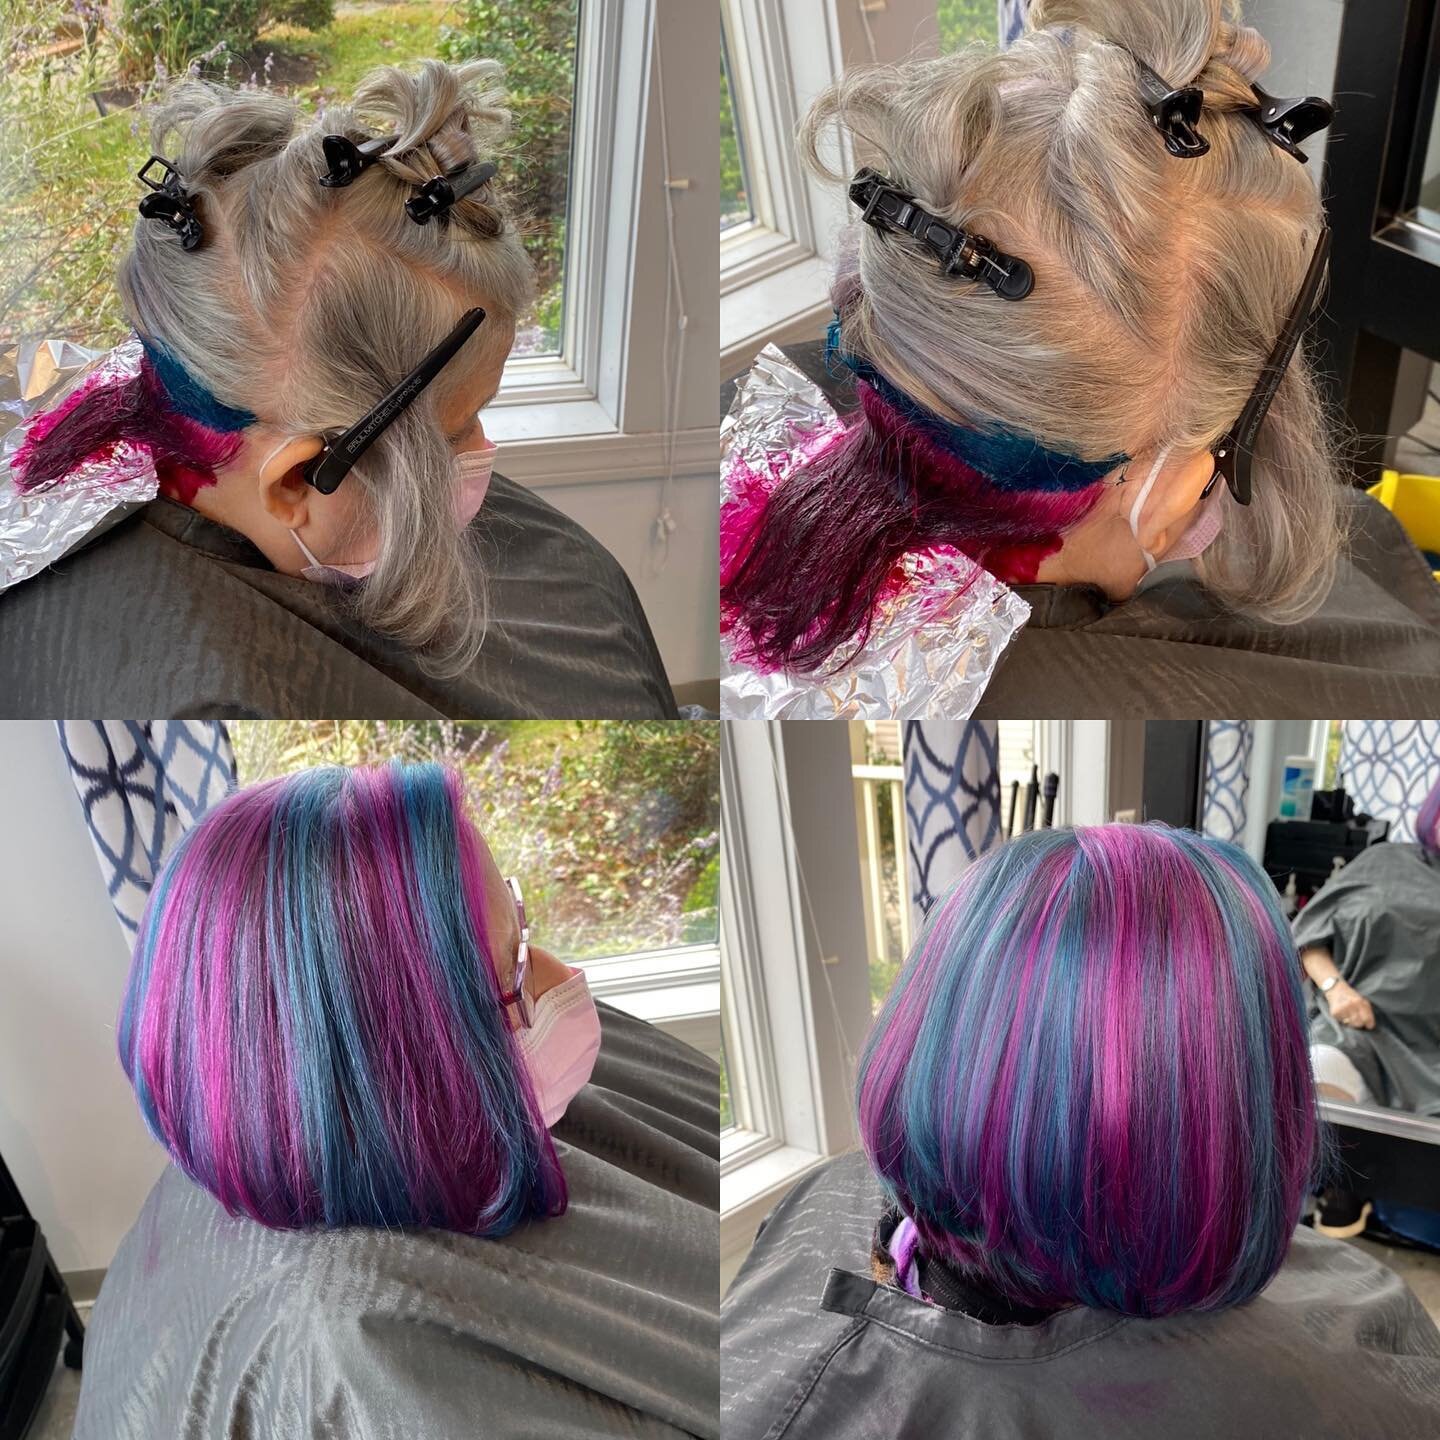 She wanted &ldquo;Vibrant&rdquo; and she got what she asked for!!! She&rsquo;s so in love!! Amazing before and after!!! #beforeandafter  #hairworxs #colorpop #tealhair #pinkhair #beauty #beautifulhair